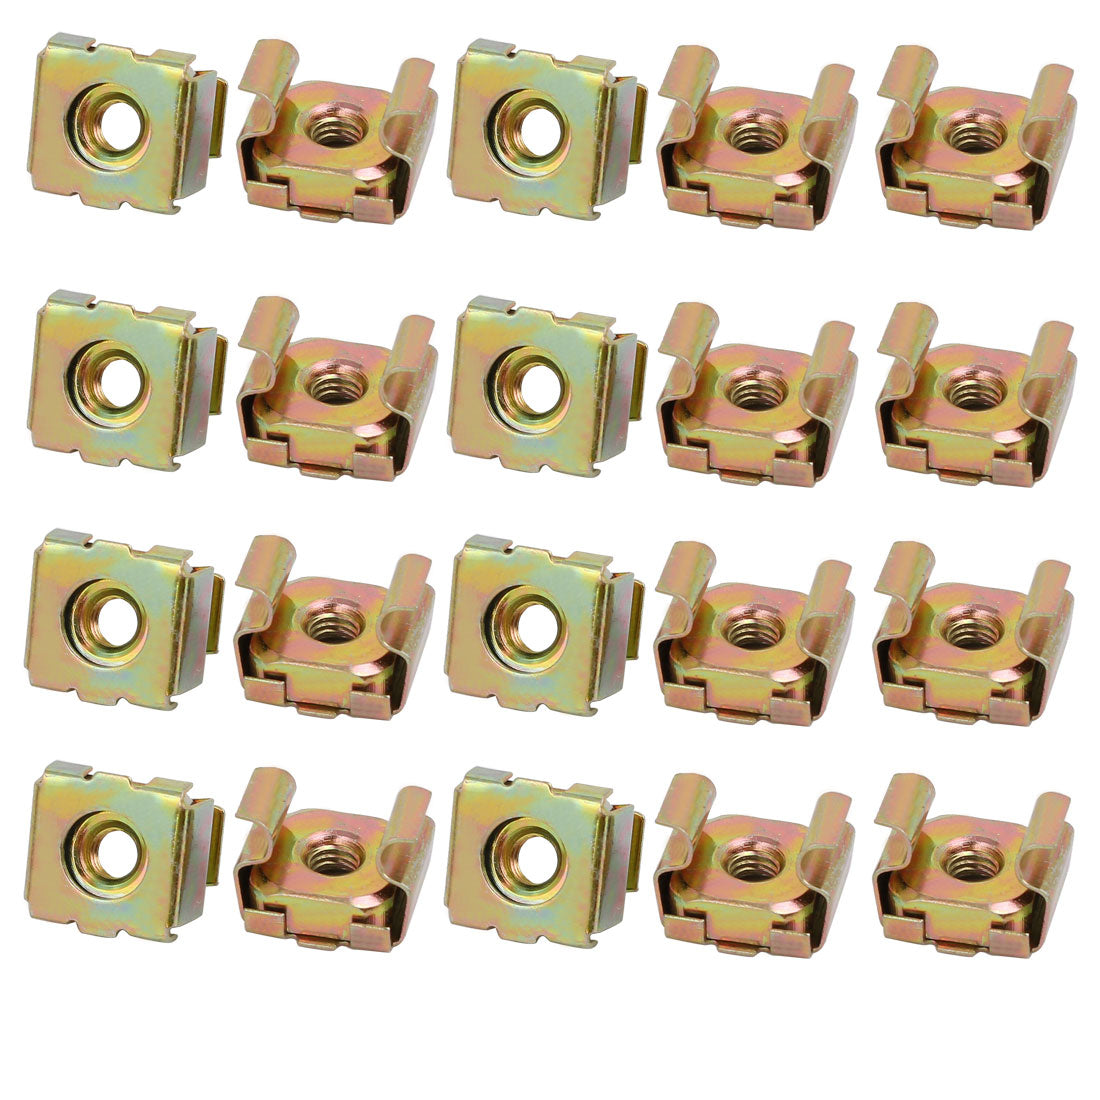 uxcell Uxcell 20pcs M4 Carbon Steel Captive Cage Nut Brass Tone for Server Shelf Cabinet